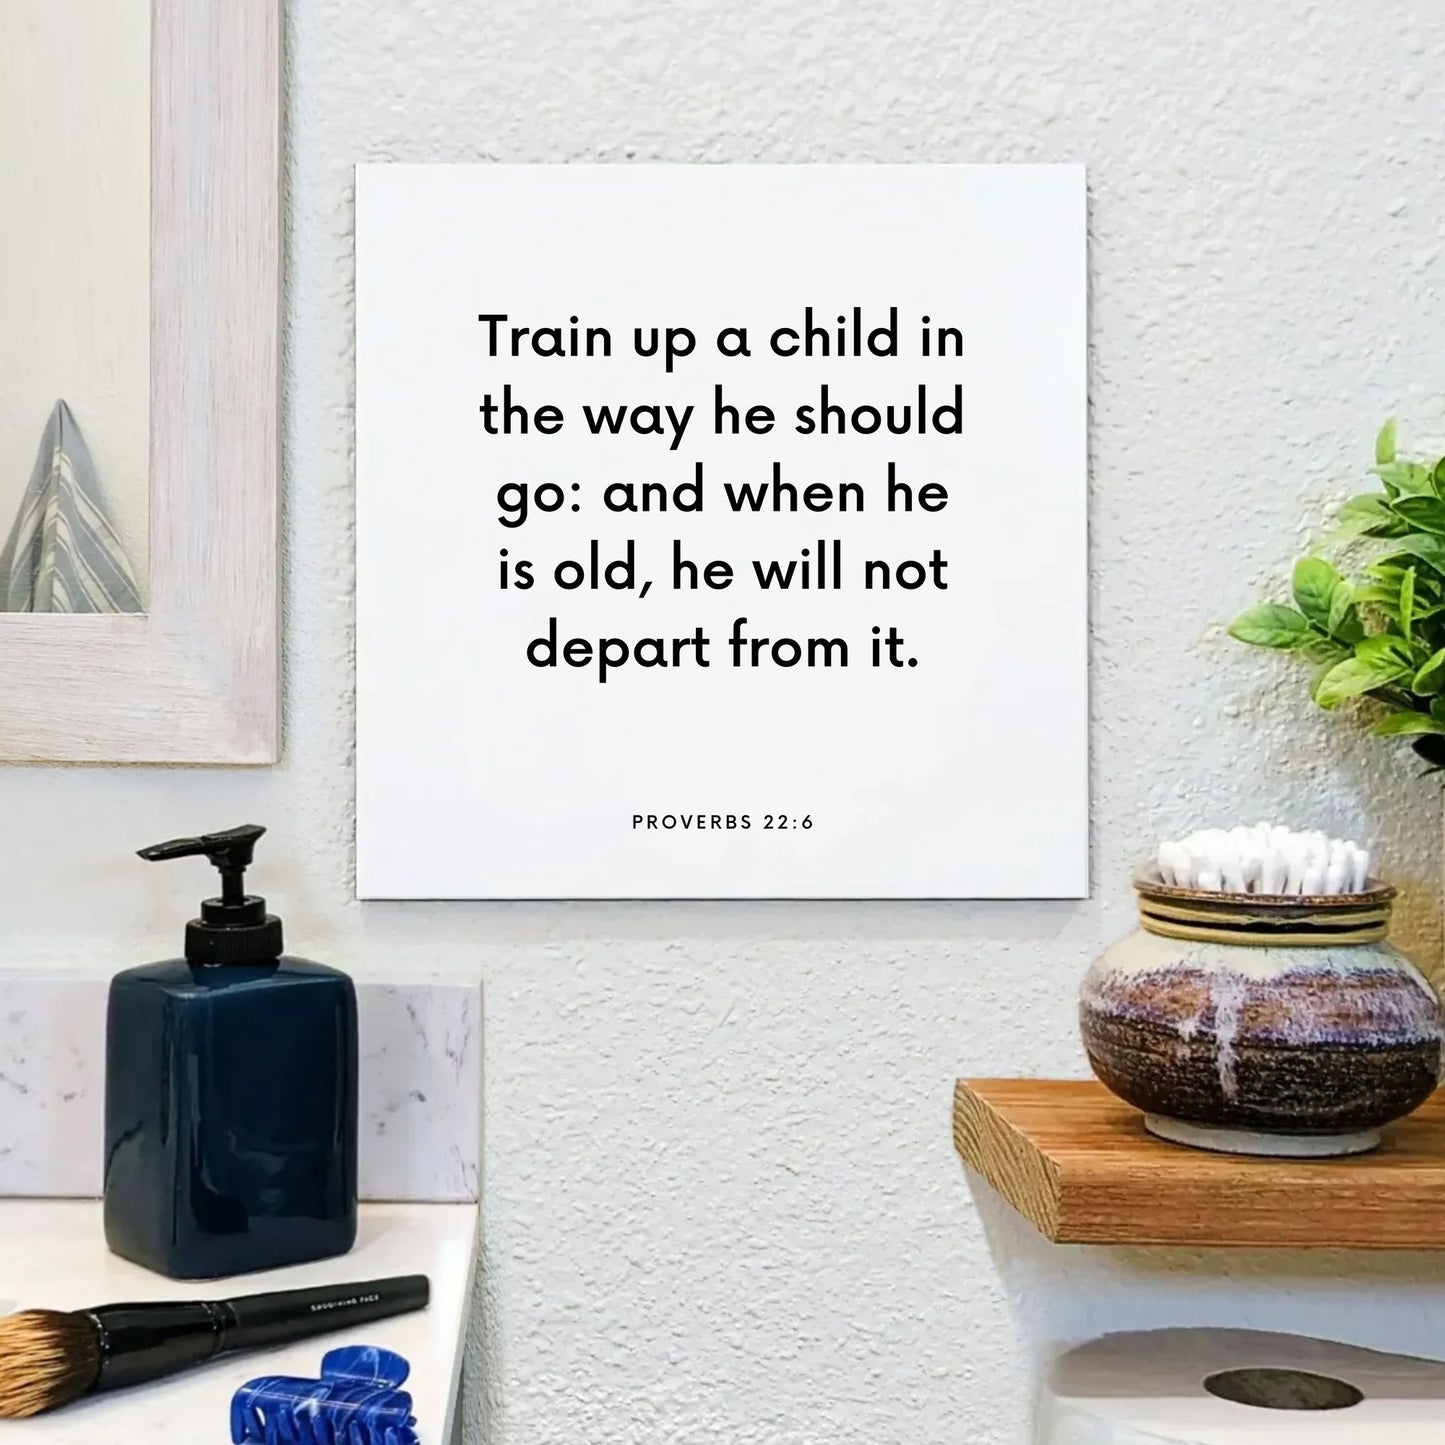 Bathroom mouting of the scripture tile for Proverbs 22:6 - "Train up a child in the way he should go"